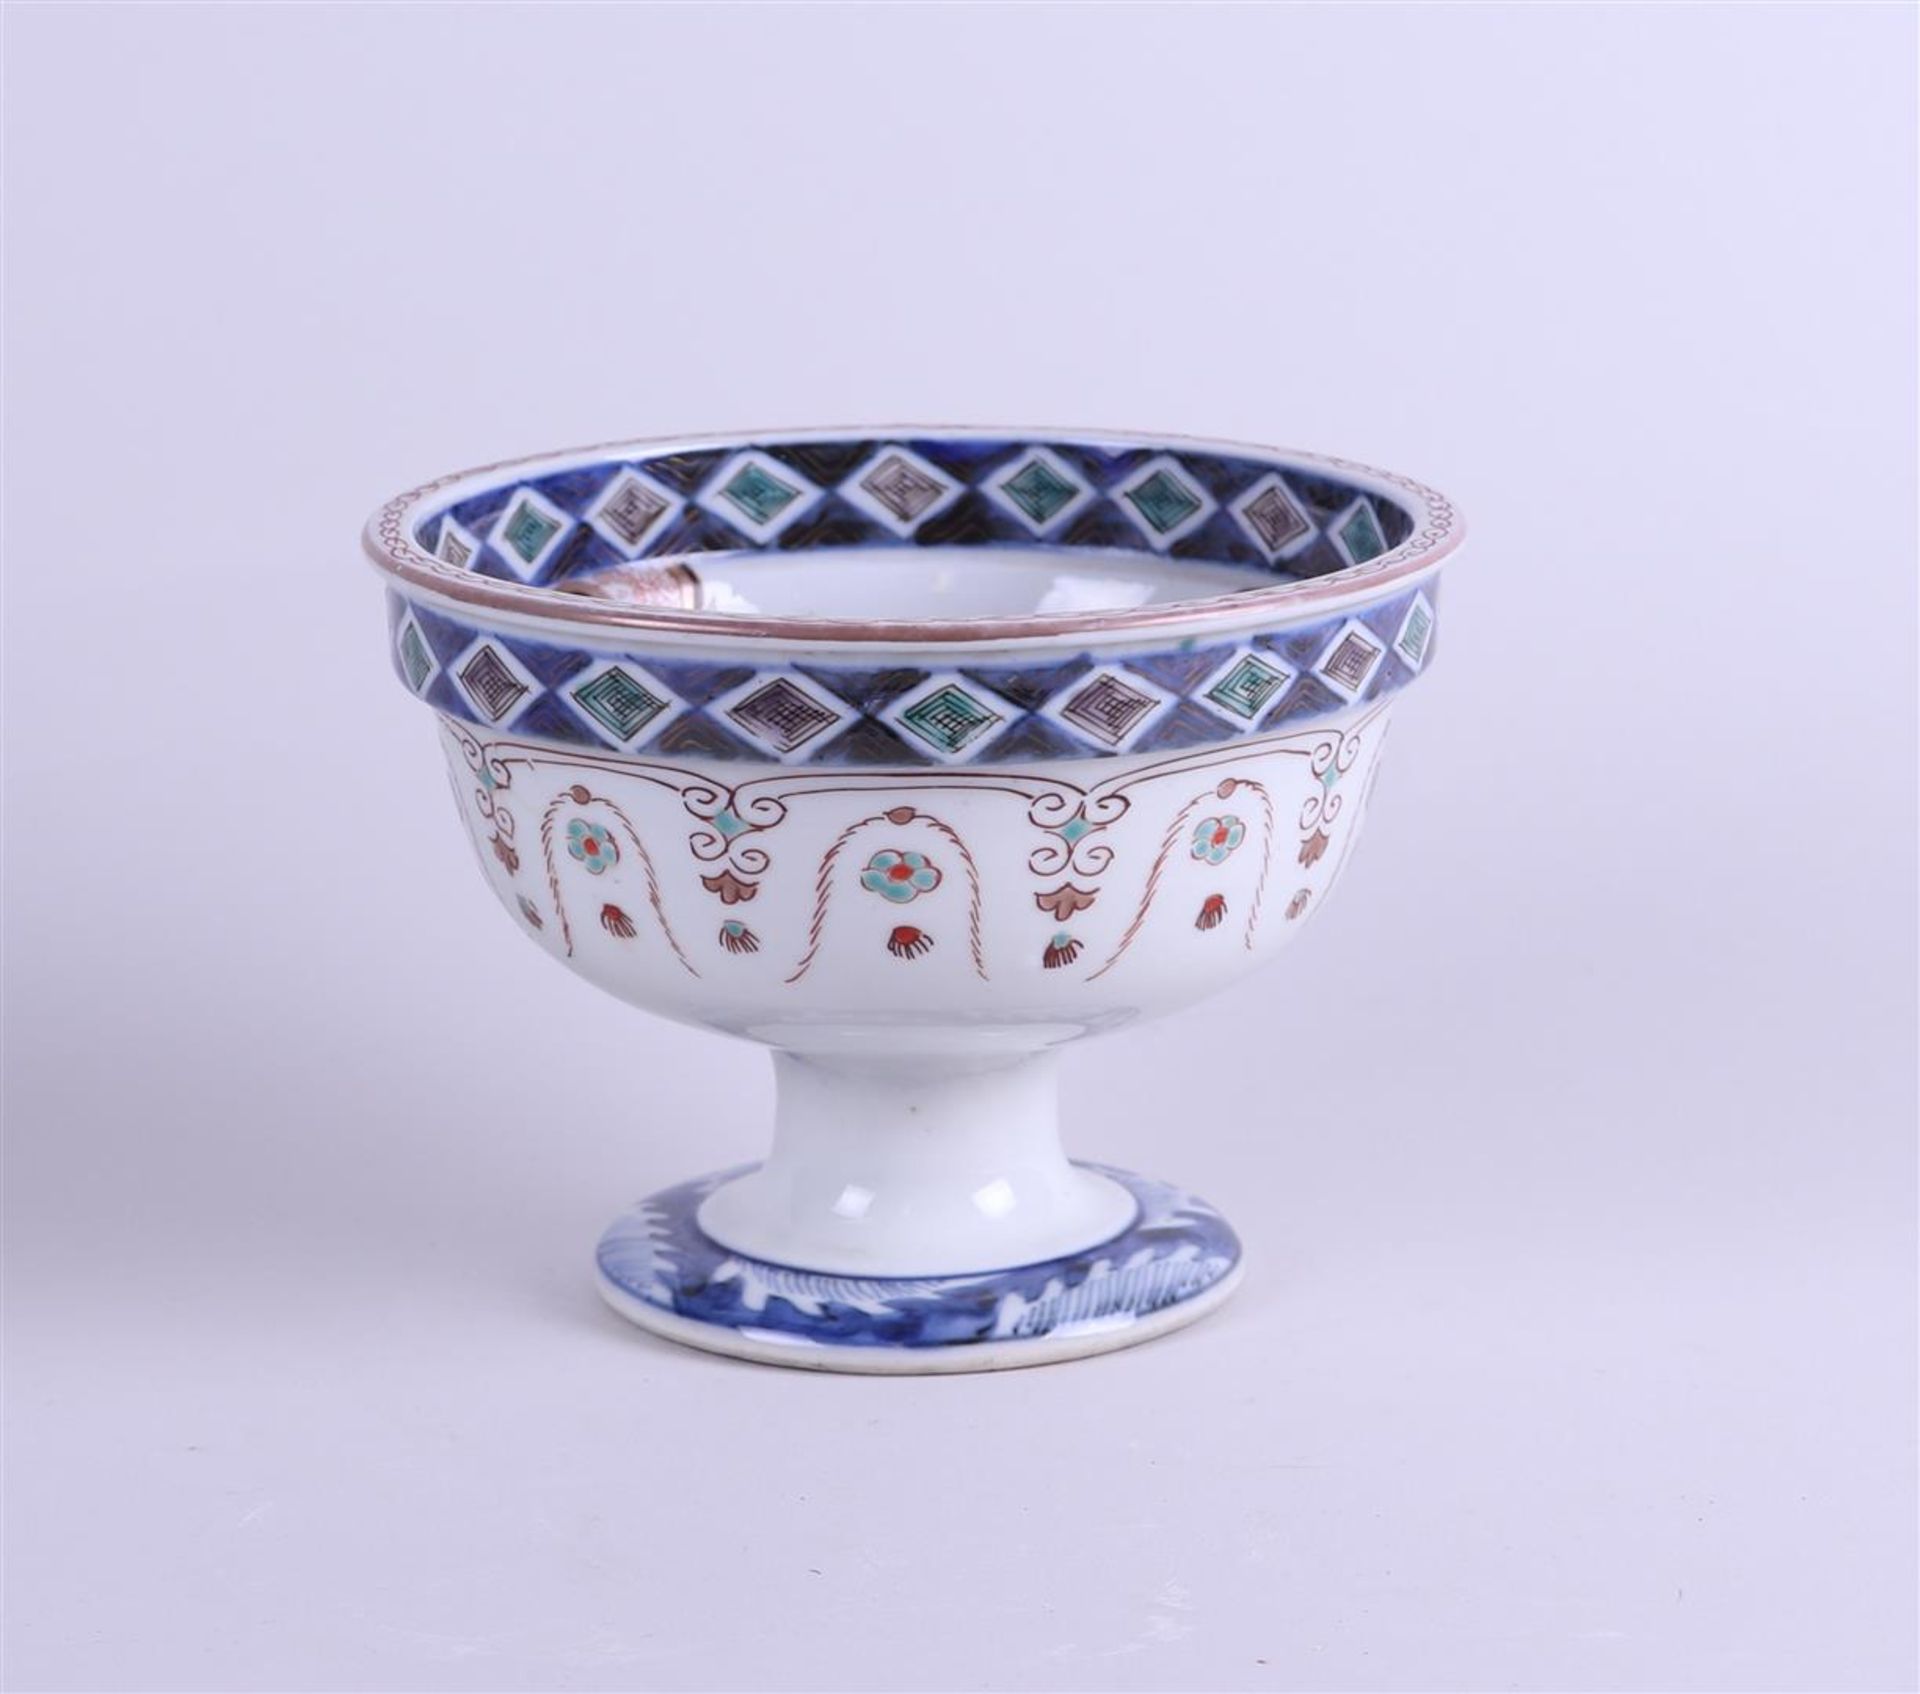 An Imari stem cup decorated with birds and blossoms on the inside, Japan, 19th century.